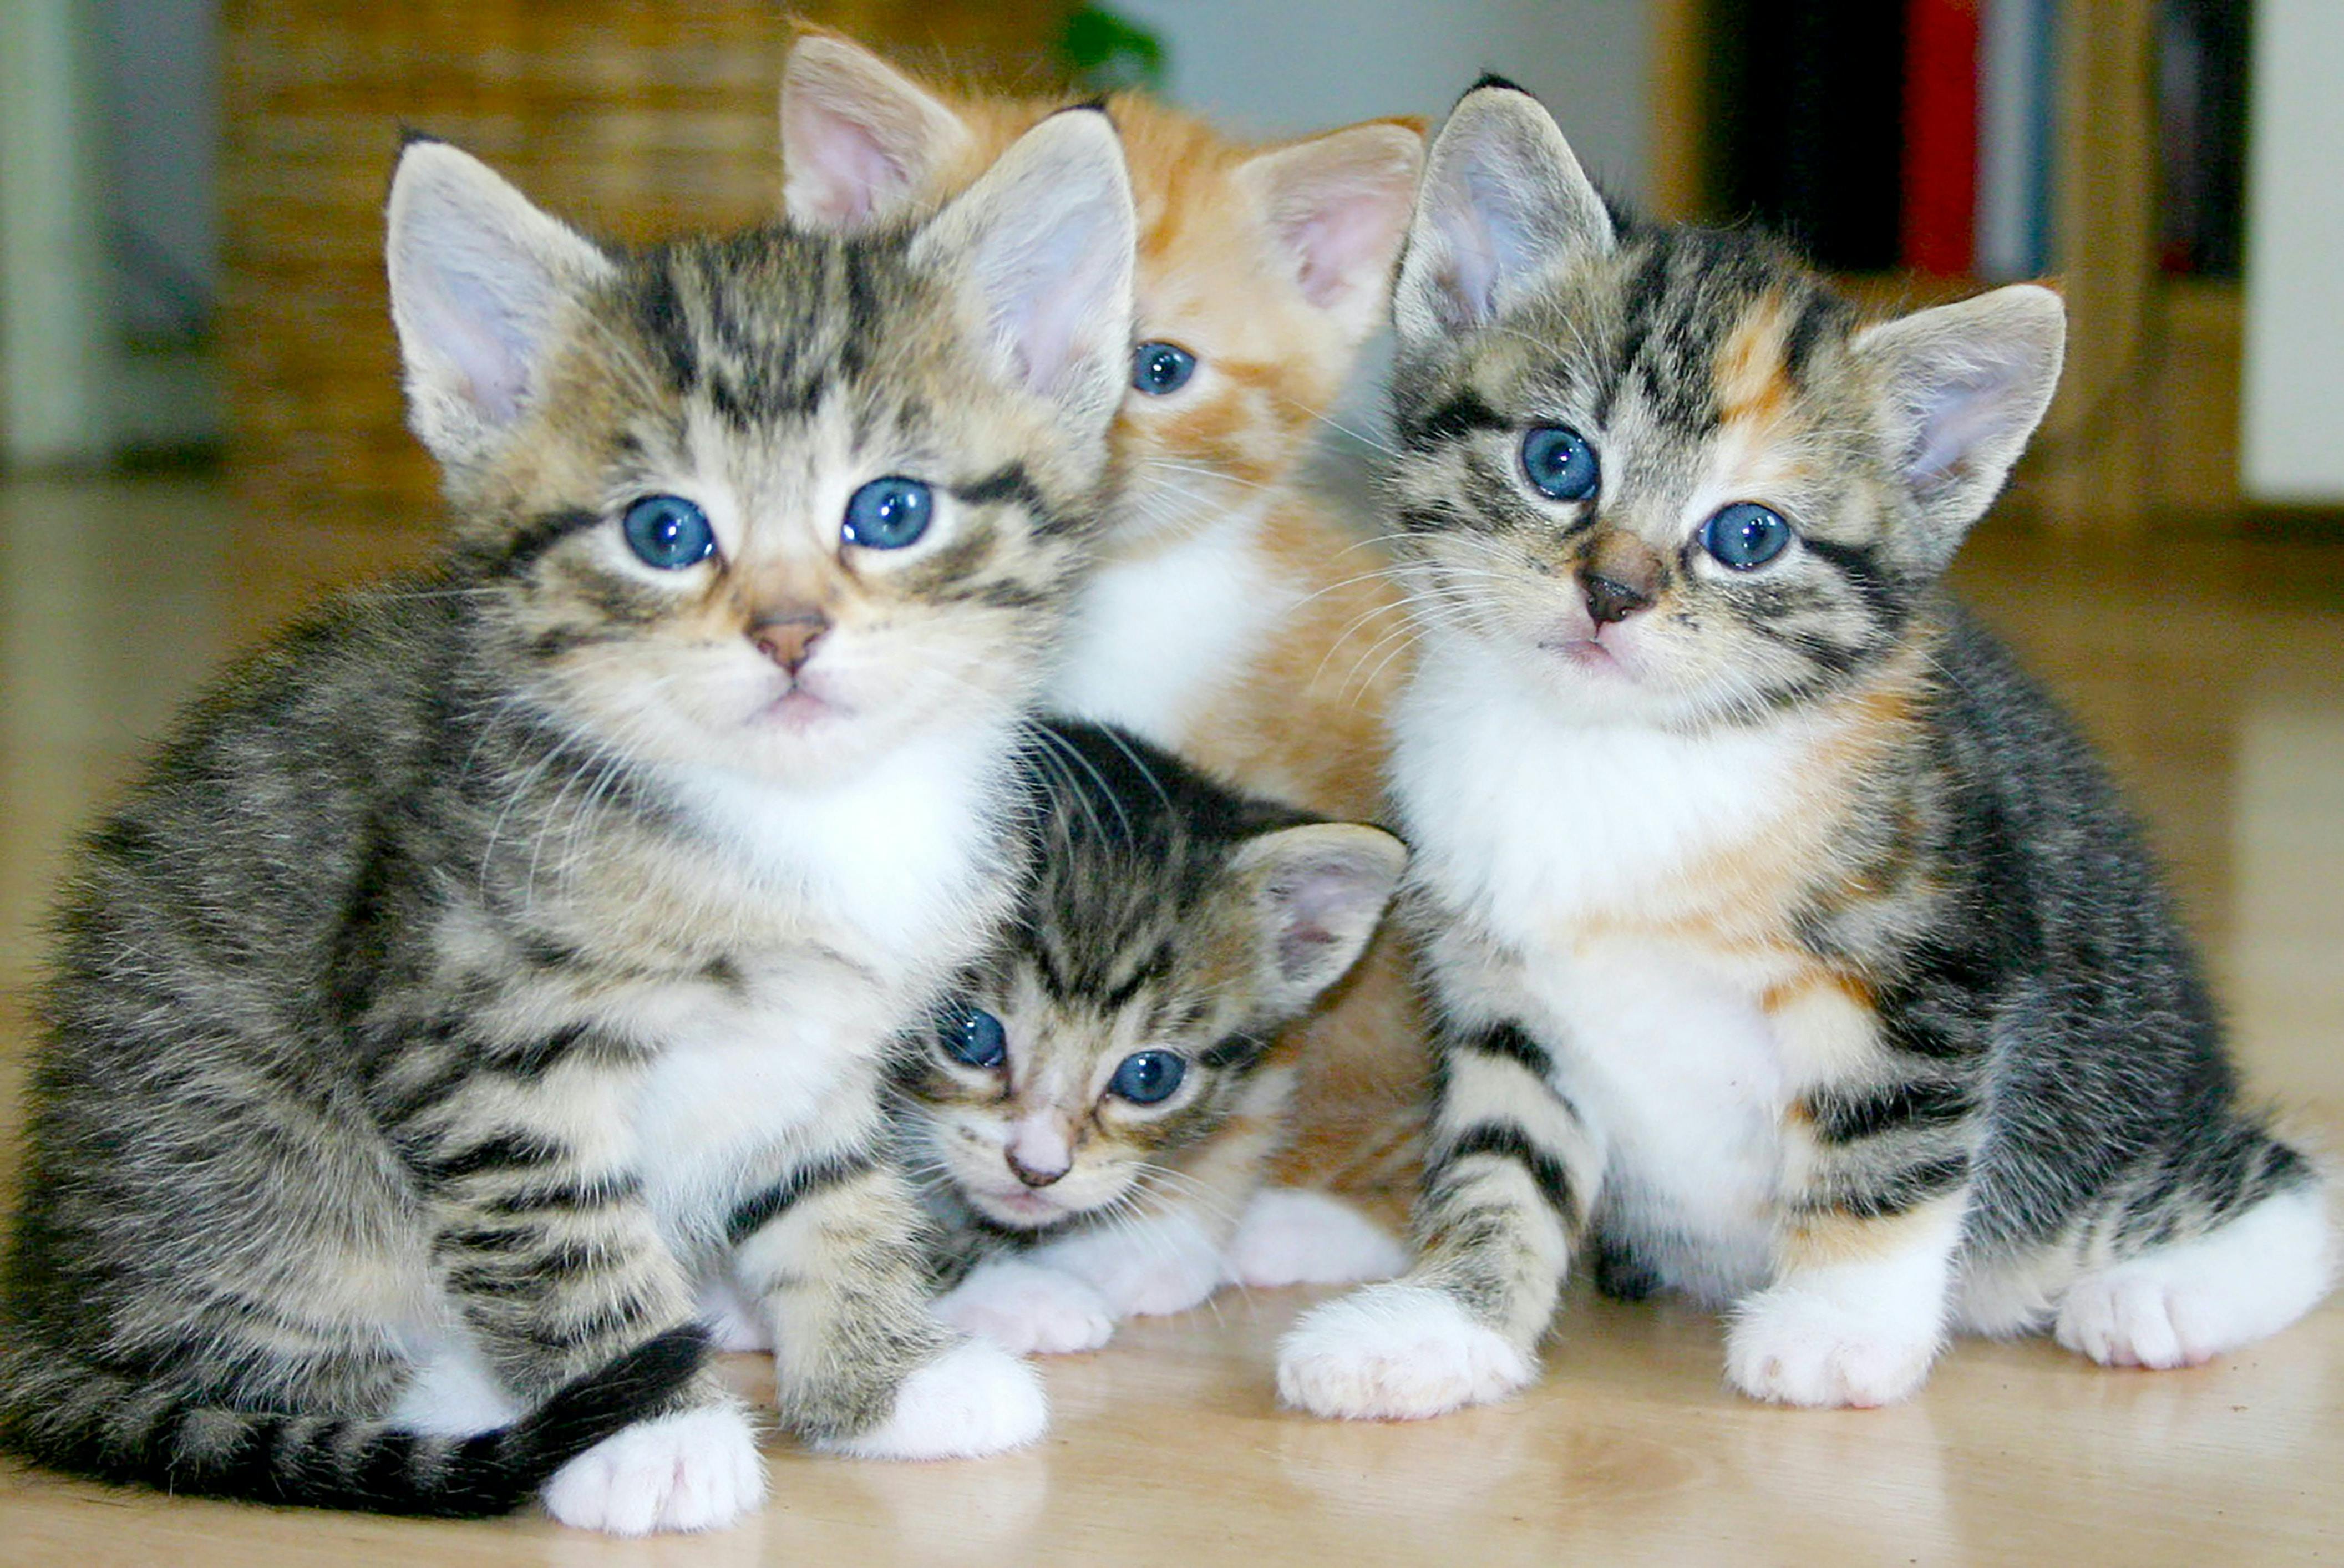 A group of four tabby kittens sitting on the floor.